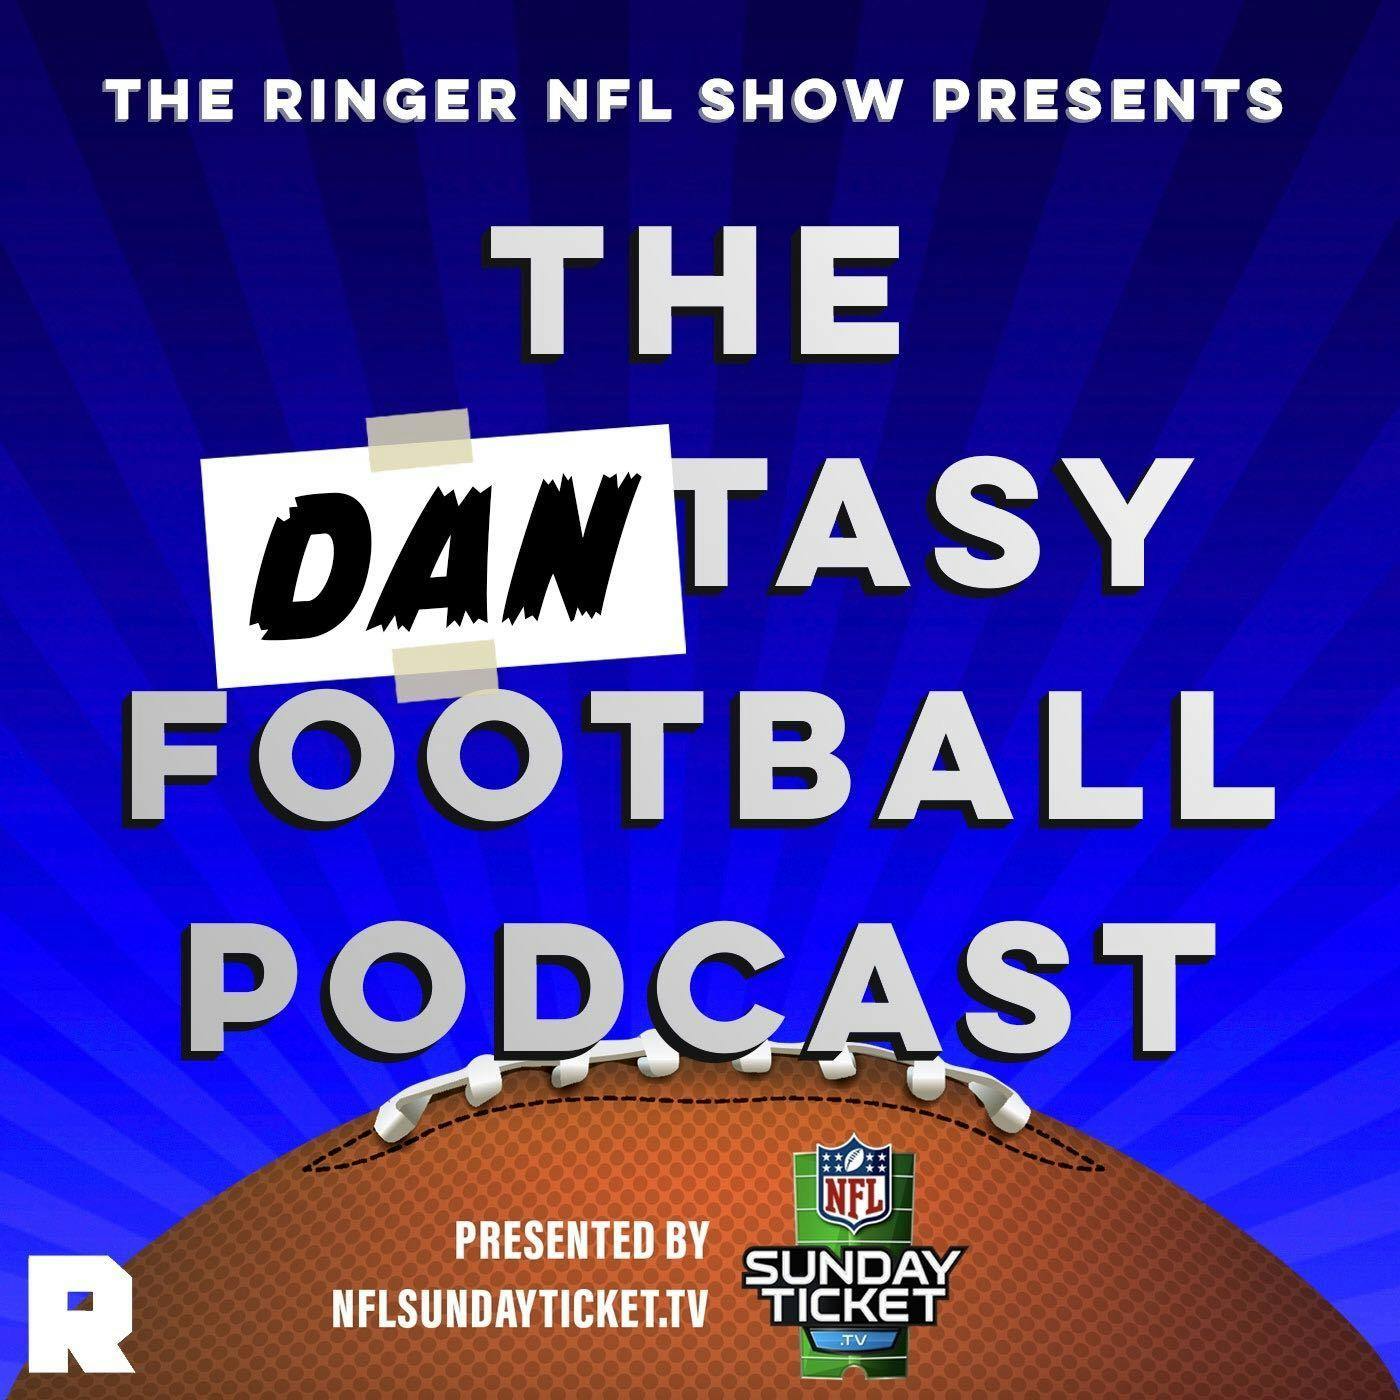 Which Fantasy Tight Ends, Defenses, and Kickers Do You Want in 2019? l The Dantasy Football Podcast